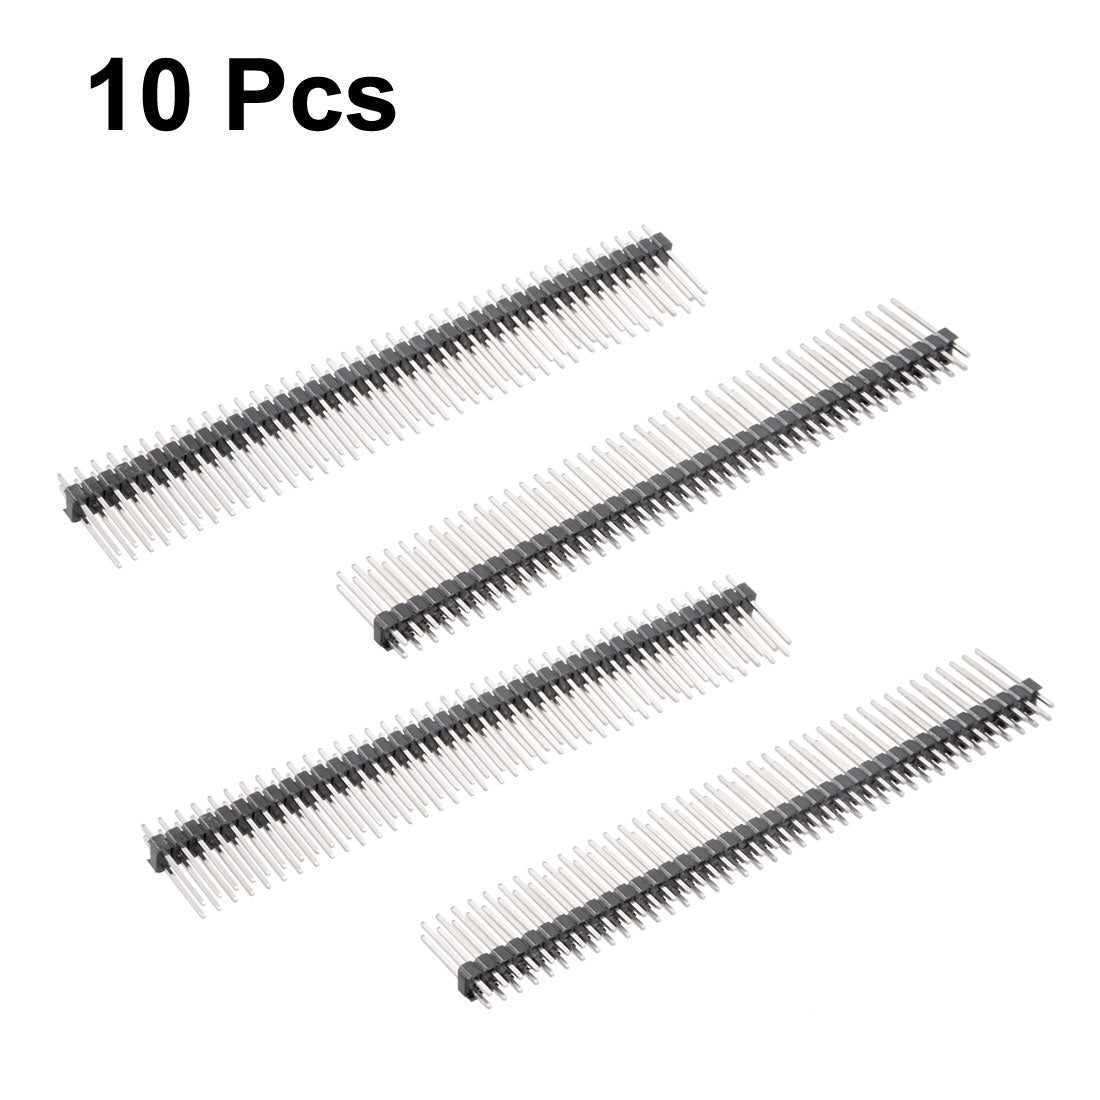 uxcell Uxcell 10Pcs 2.54mm Pitch 40-Pin 19mm Length Double Row Straight Connector Pin Header Strip for Arduino Prototype Shield